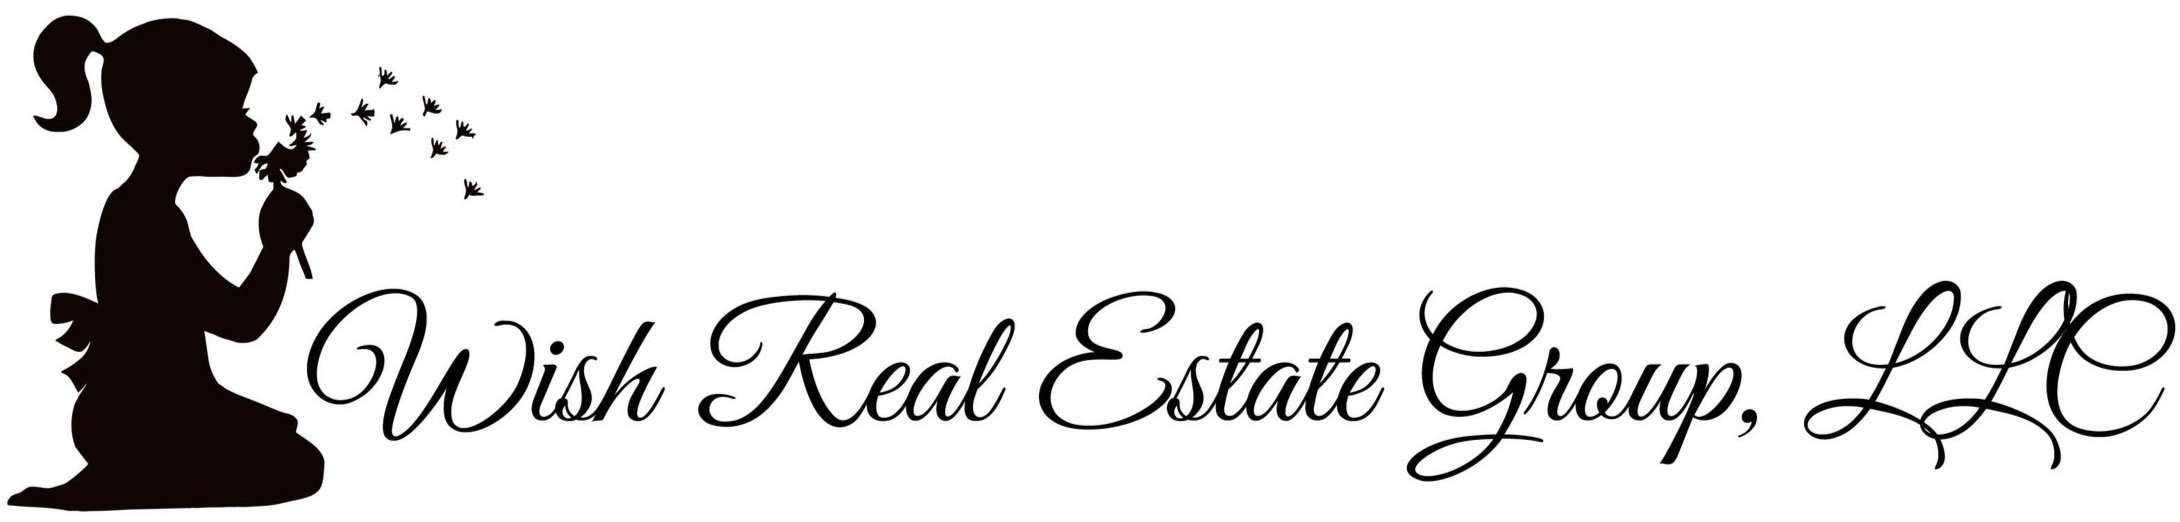 Wish Real Estate Group